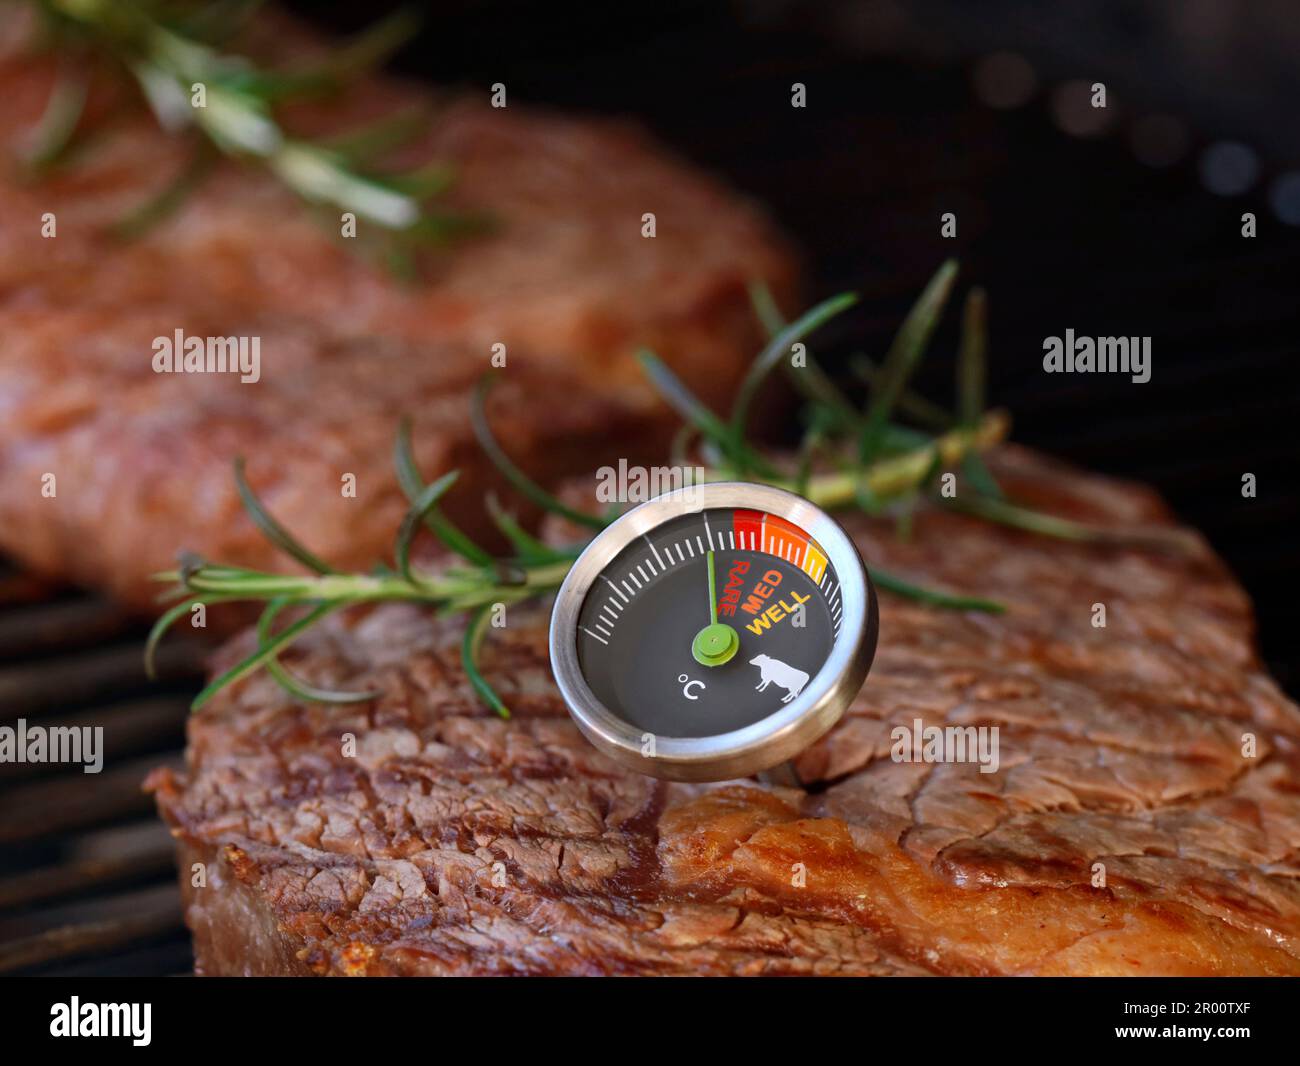 https://c8.alamy.com/comp/2R00TXF/delicious-beef-steak-on-grill-grate-with-a-meat-thermometer-showing-doneness-of-rare-medium-and-well-done-2R00TXF.jpg